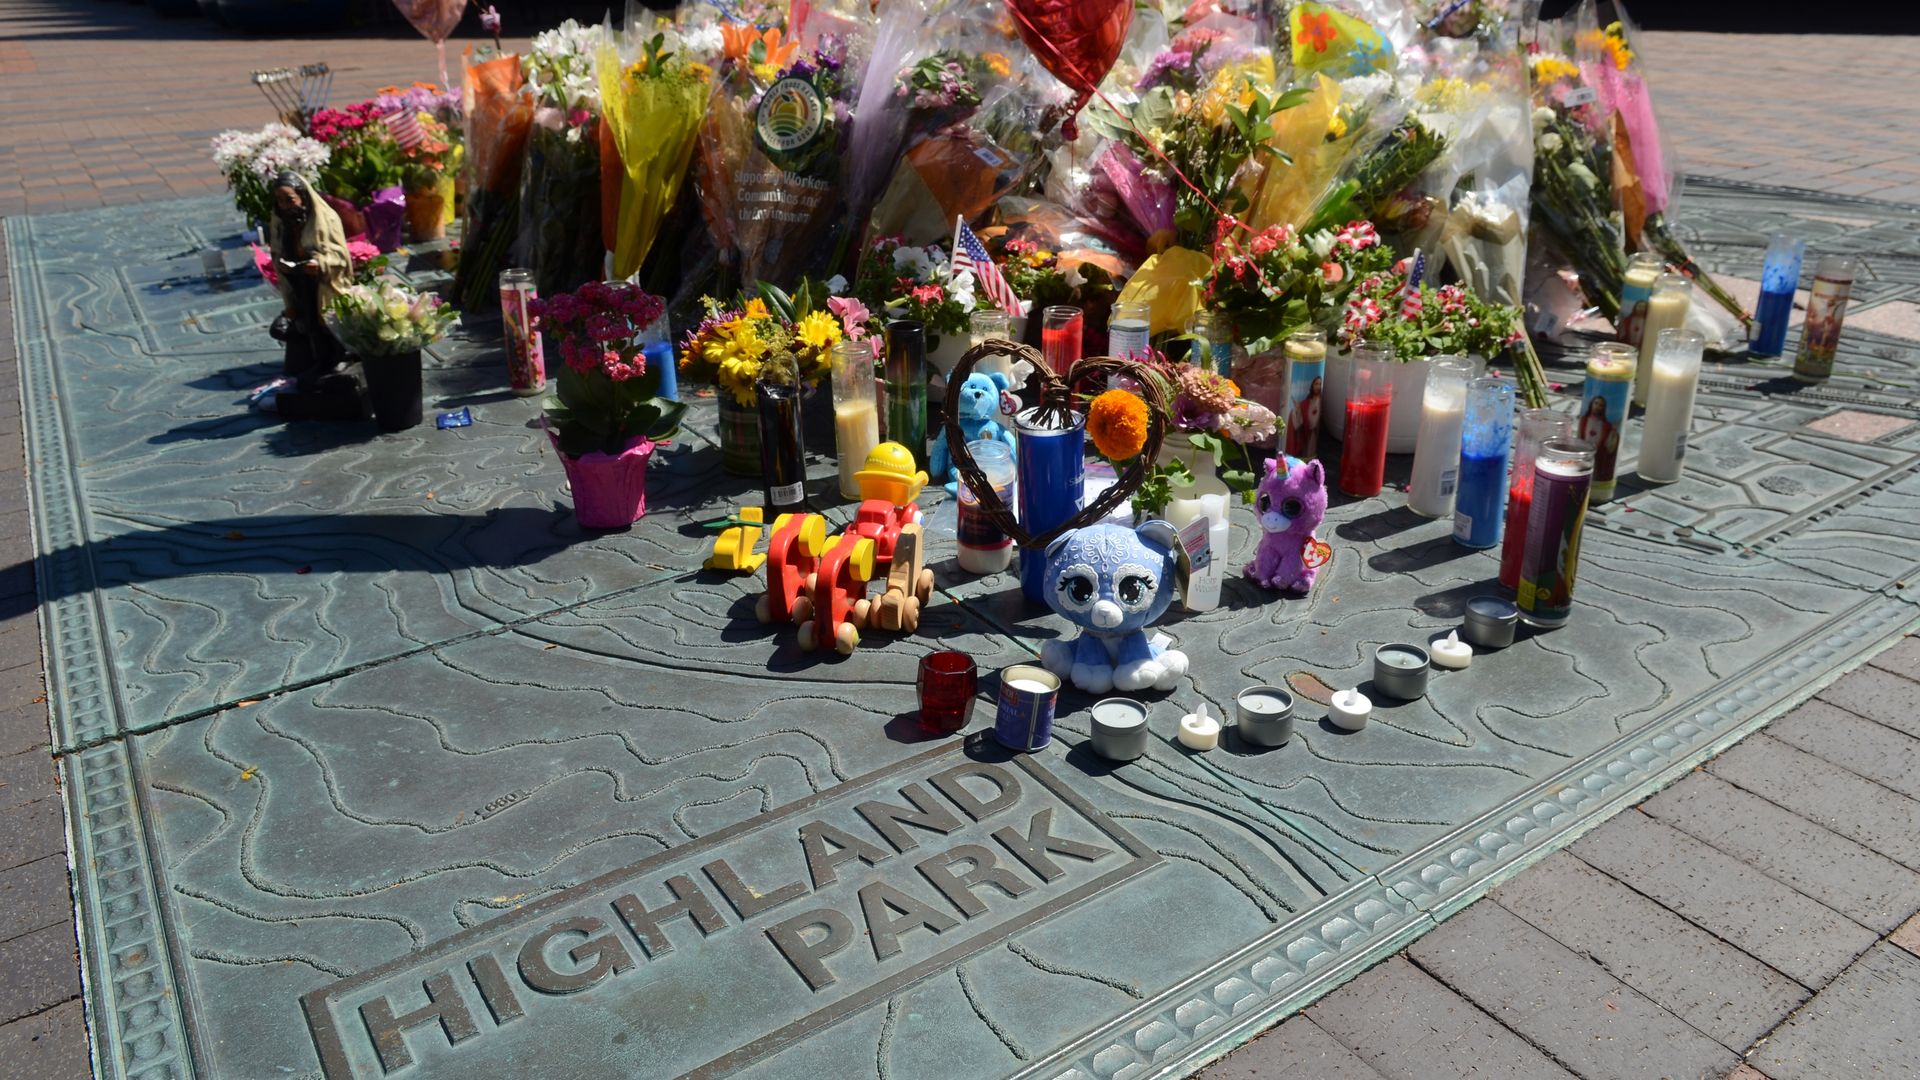 Photo of flowers and stuffed animals at a memorial site with a plaque that reads "Highland Park"